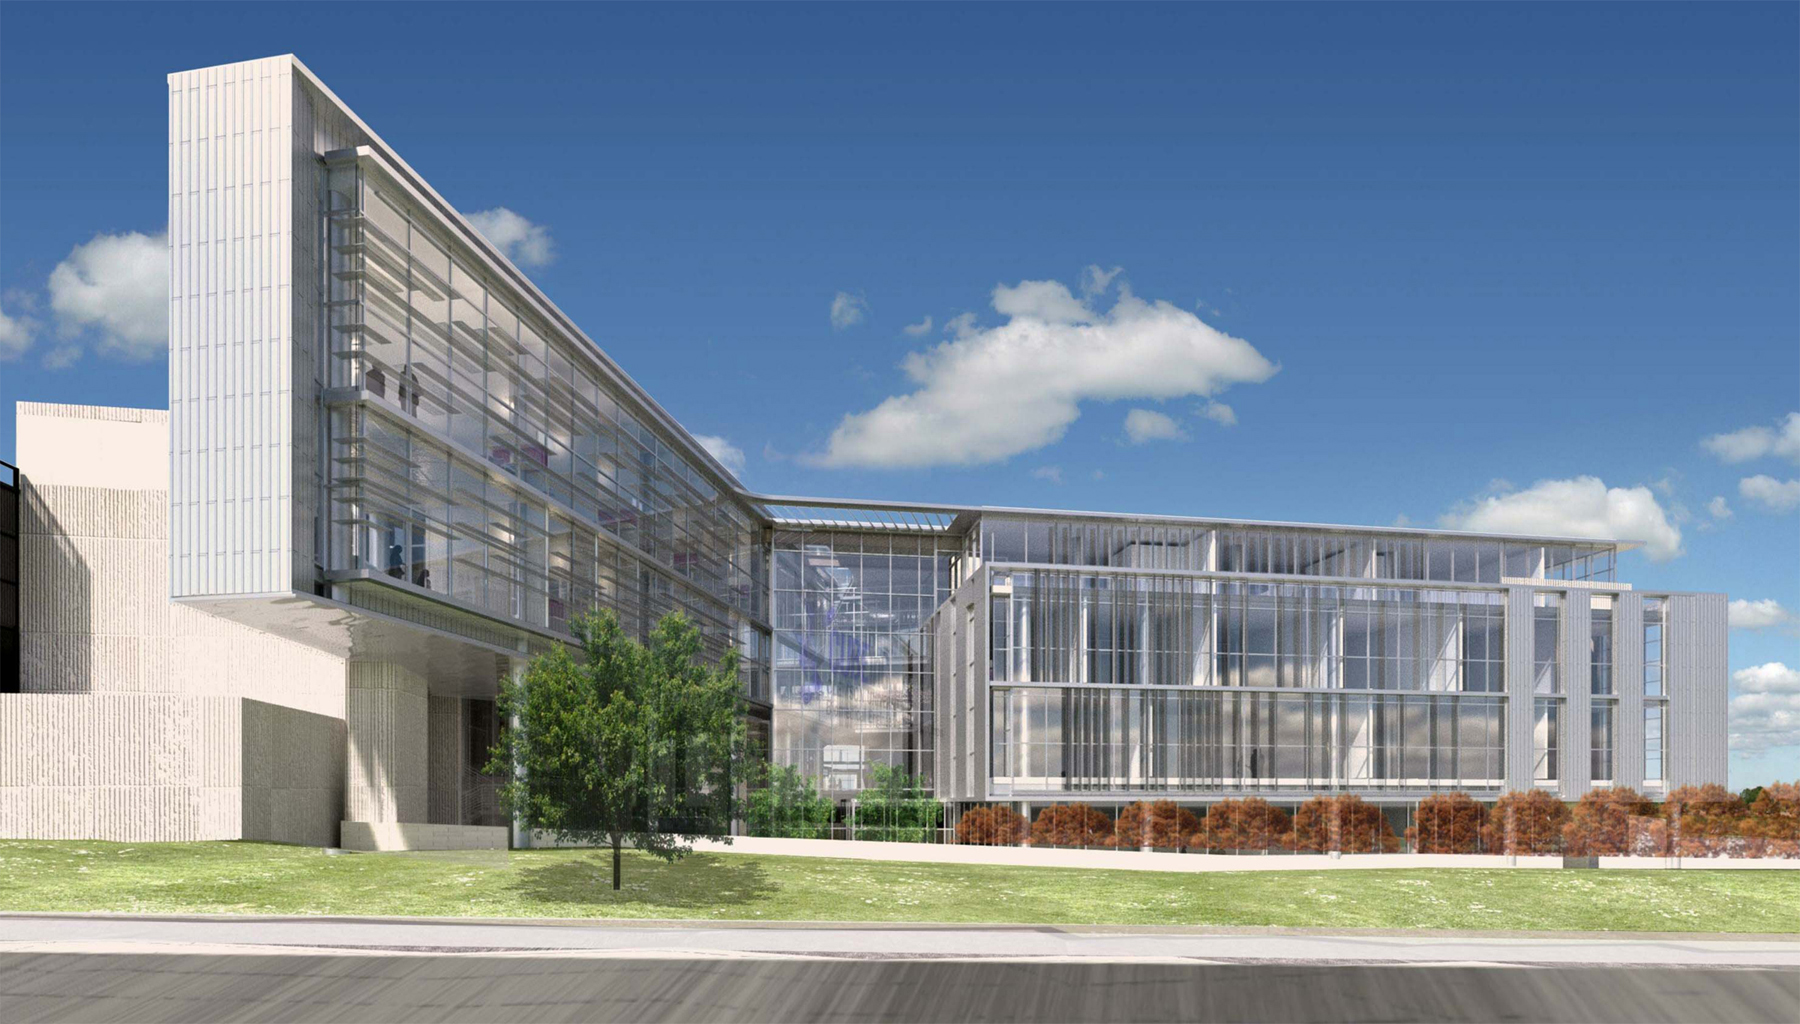 The new College of Engineering expansion was designed by Perkins+Will and Moment